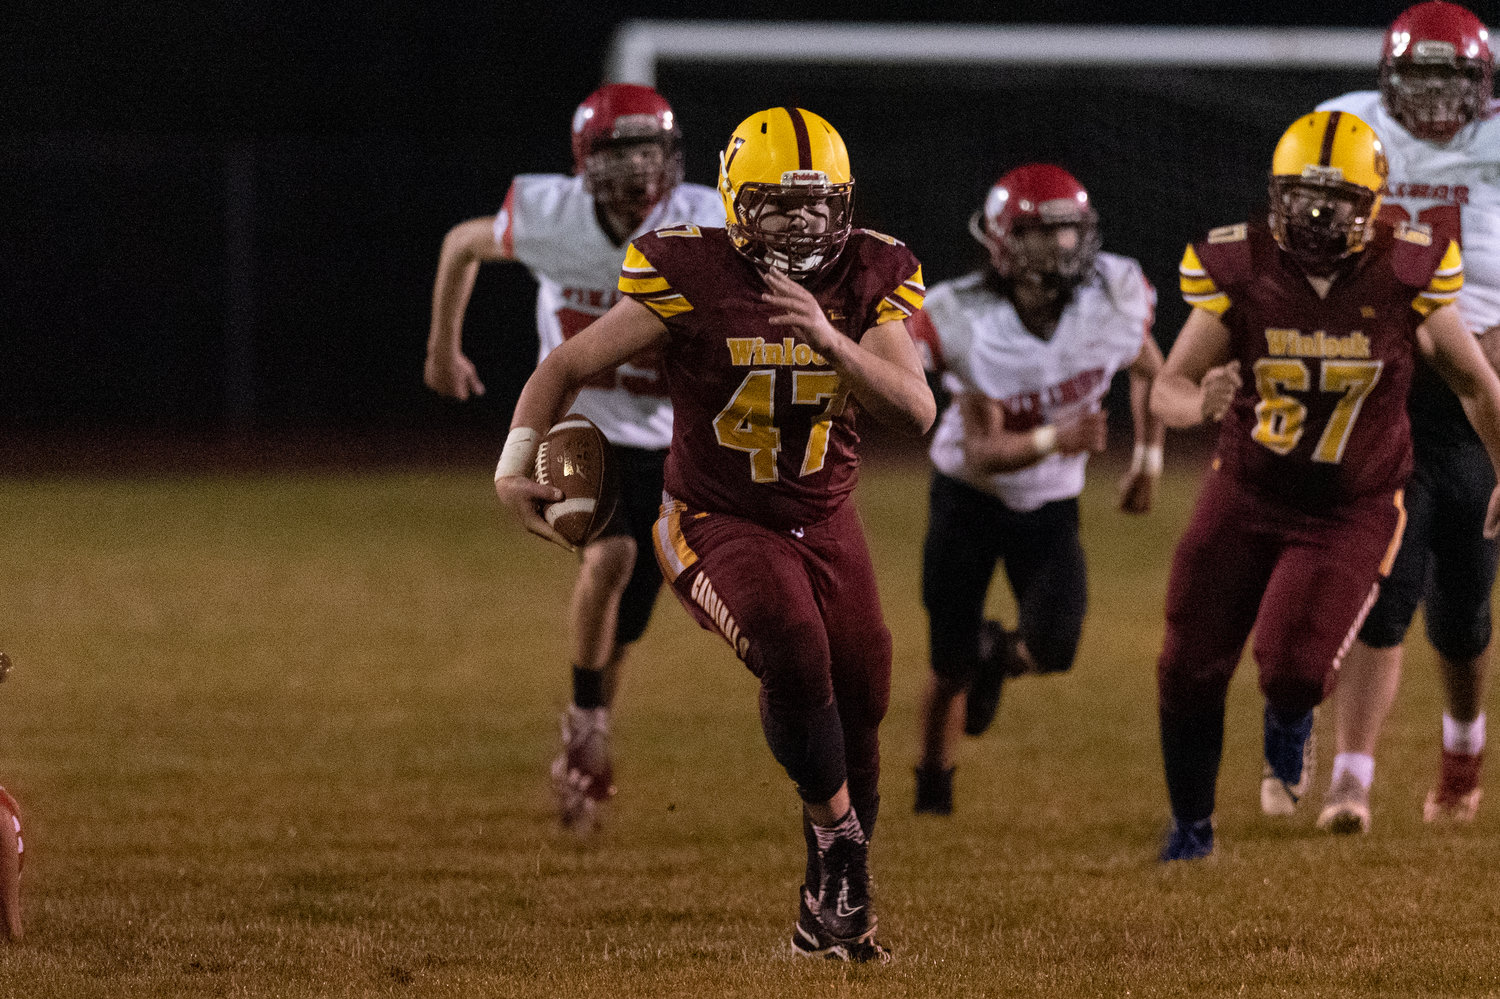 Winlock tailback Nolan Swofford breaks free for a score in the Cardinals win over Mossyrock Oct. 8.